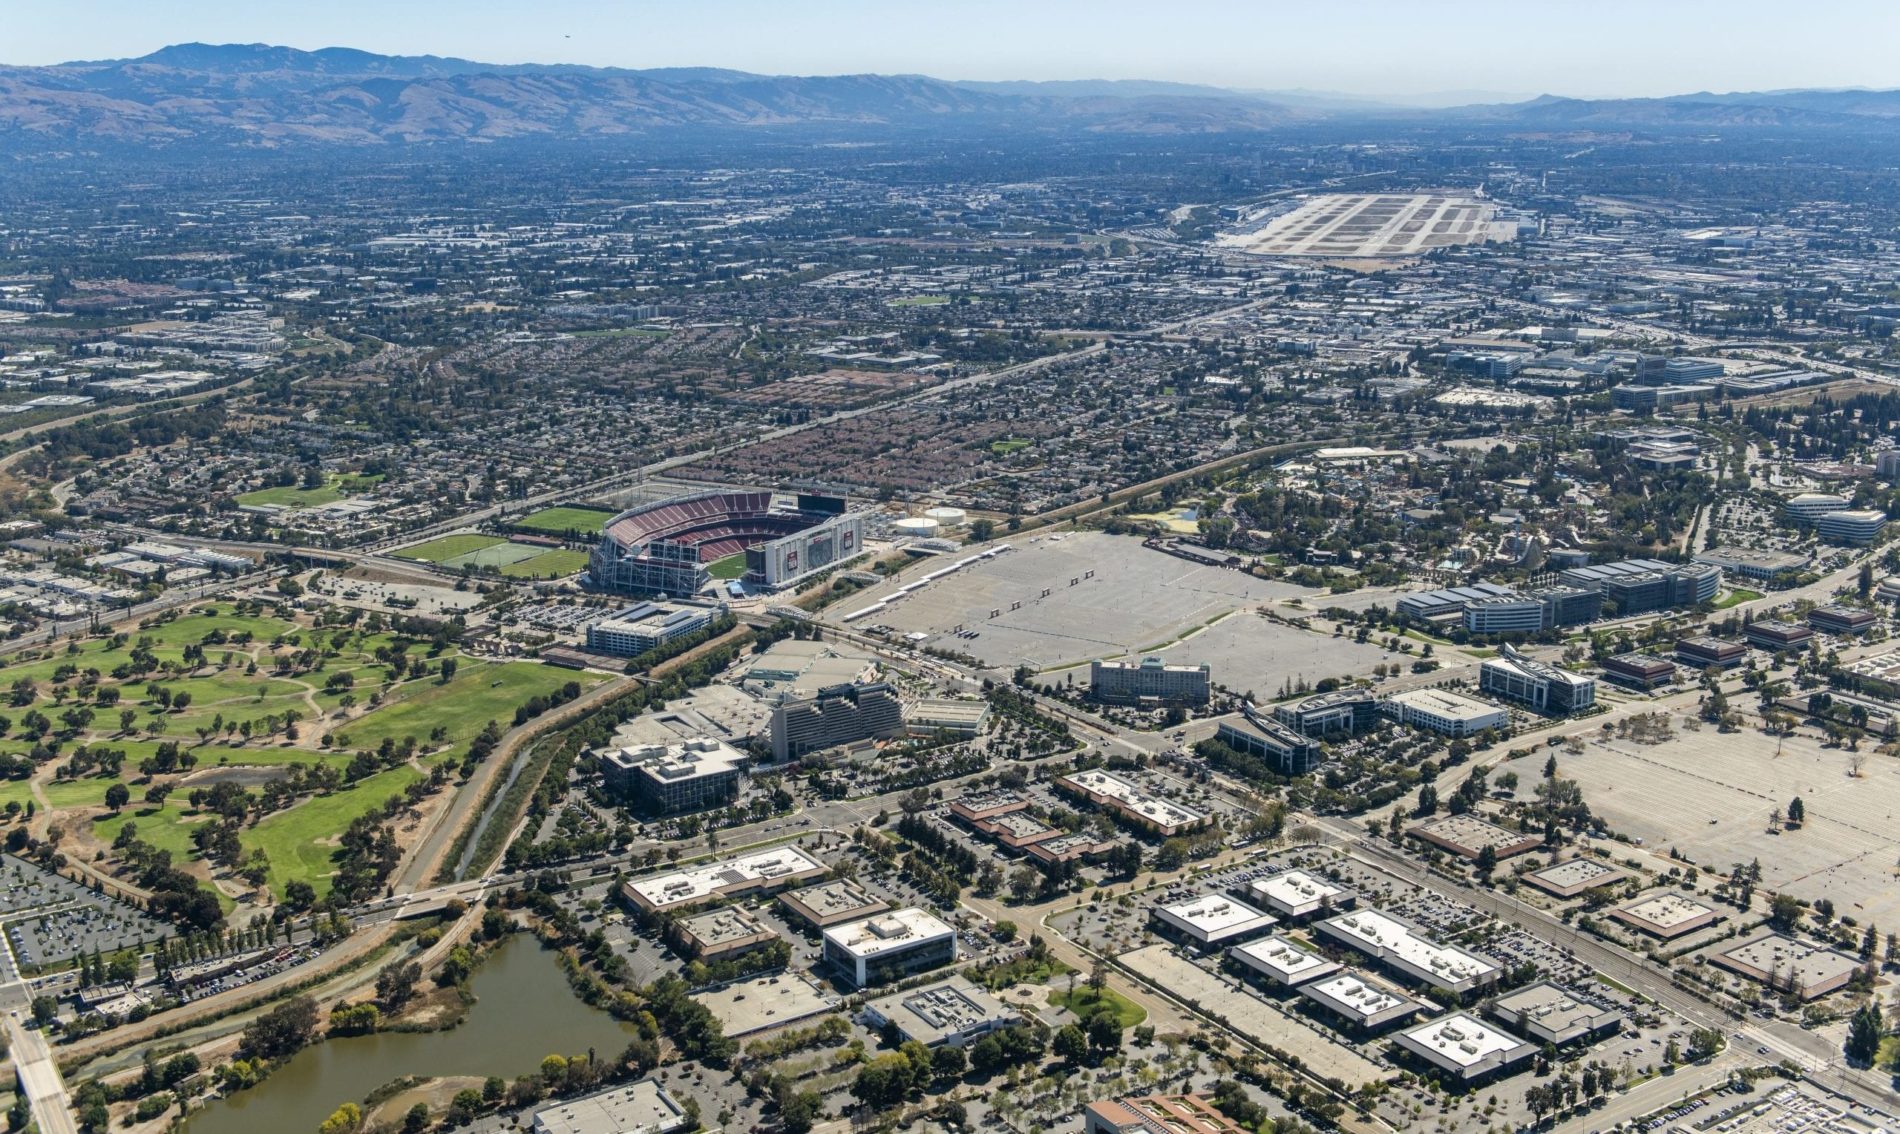 An aerial image of a part of the city of Santa Clara and North San Jose. Photo by The 111th Group.